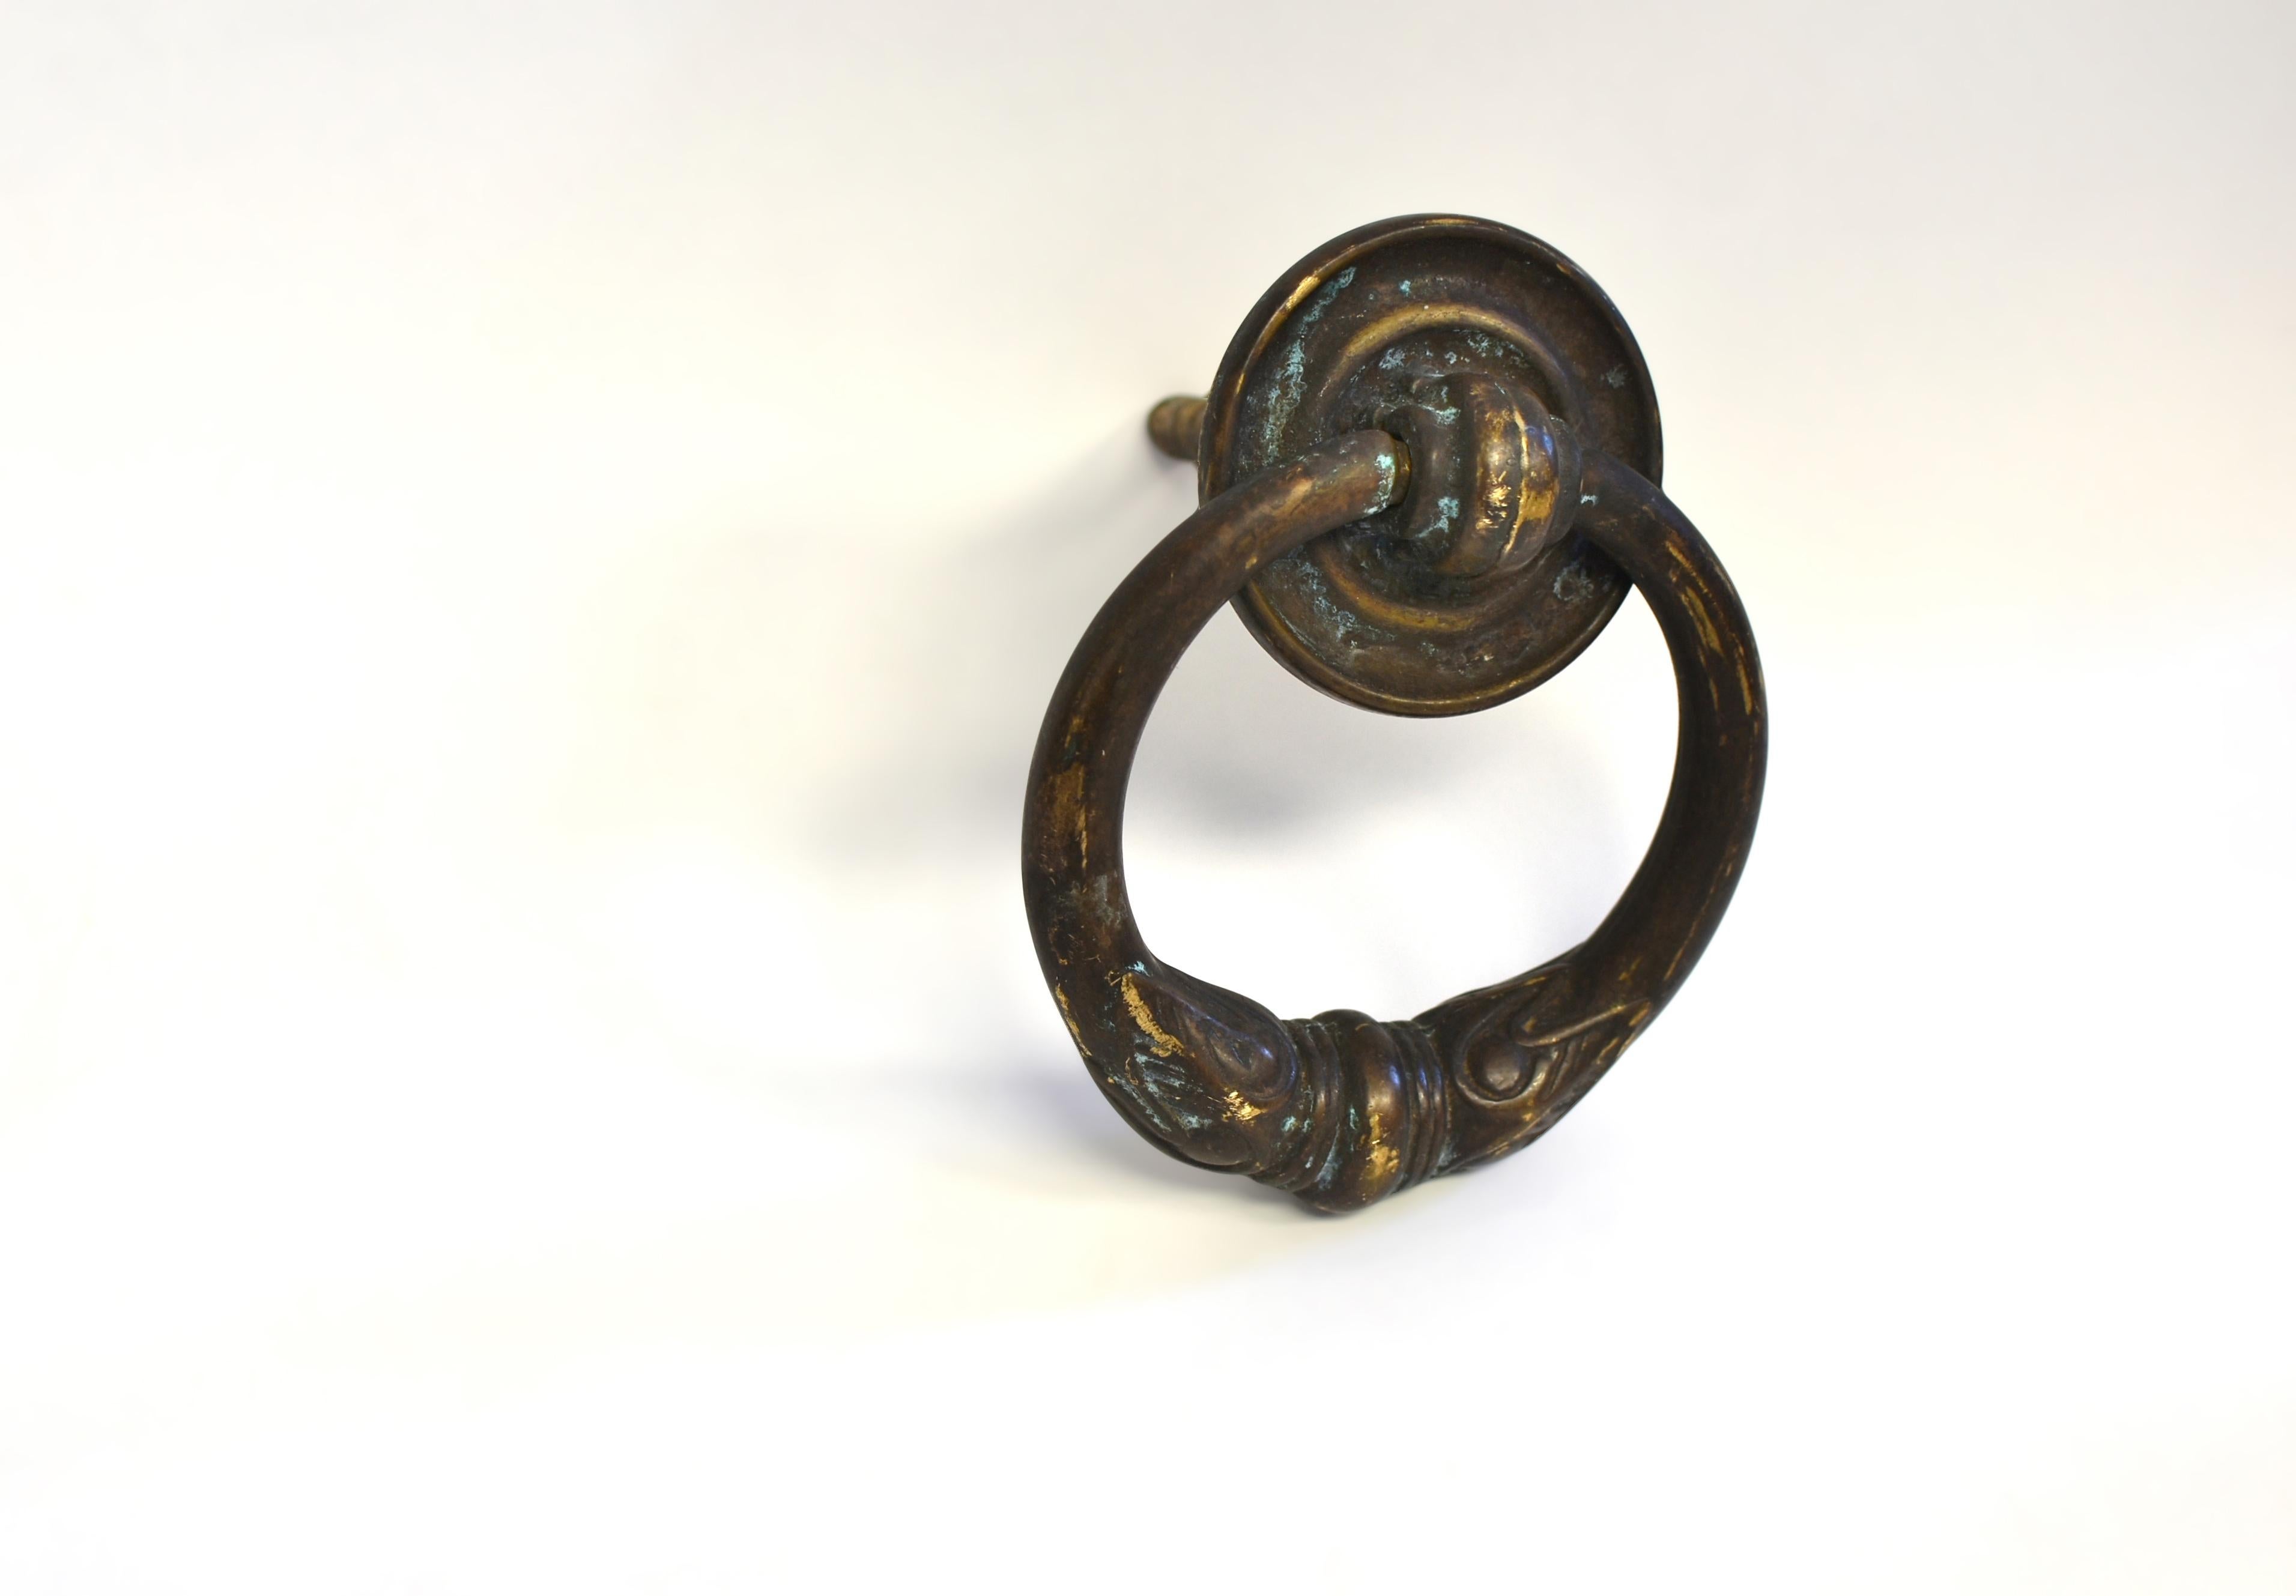 A solid antique bronze door knocker in the form of a circular handle, gradually widen reaching the middle. A pair of heraldic emblems depicting eyes with feathers decorate the knocker at the center bottom. The substantial knocker is surmounted by a